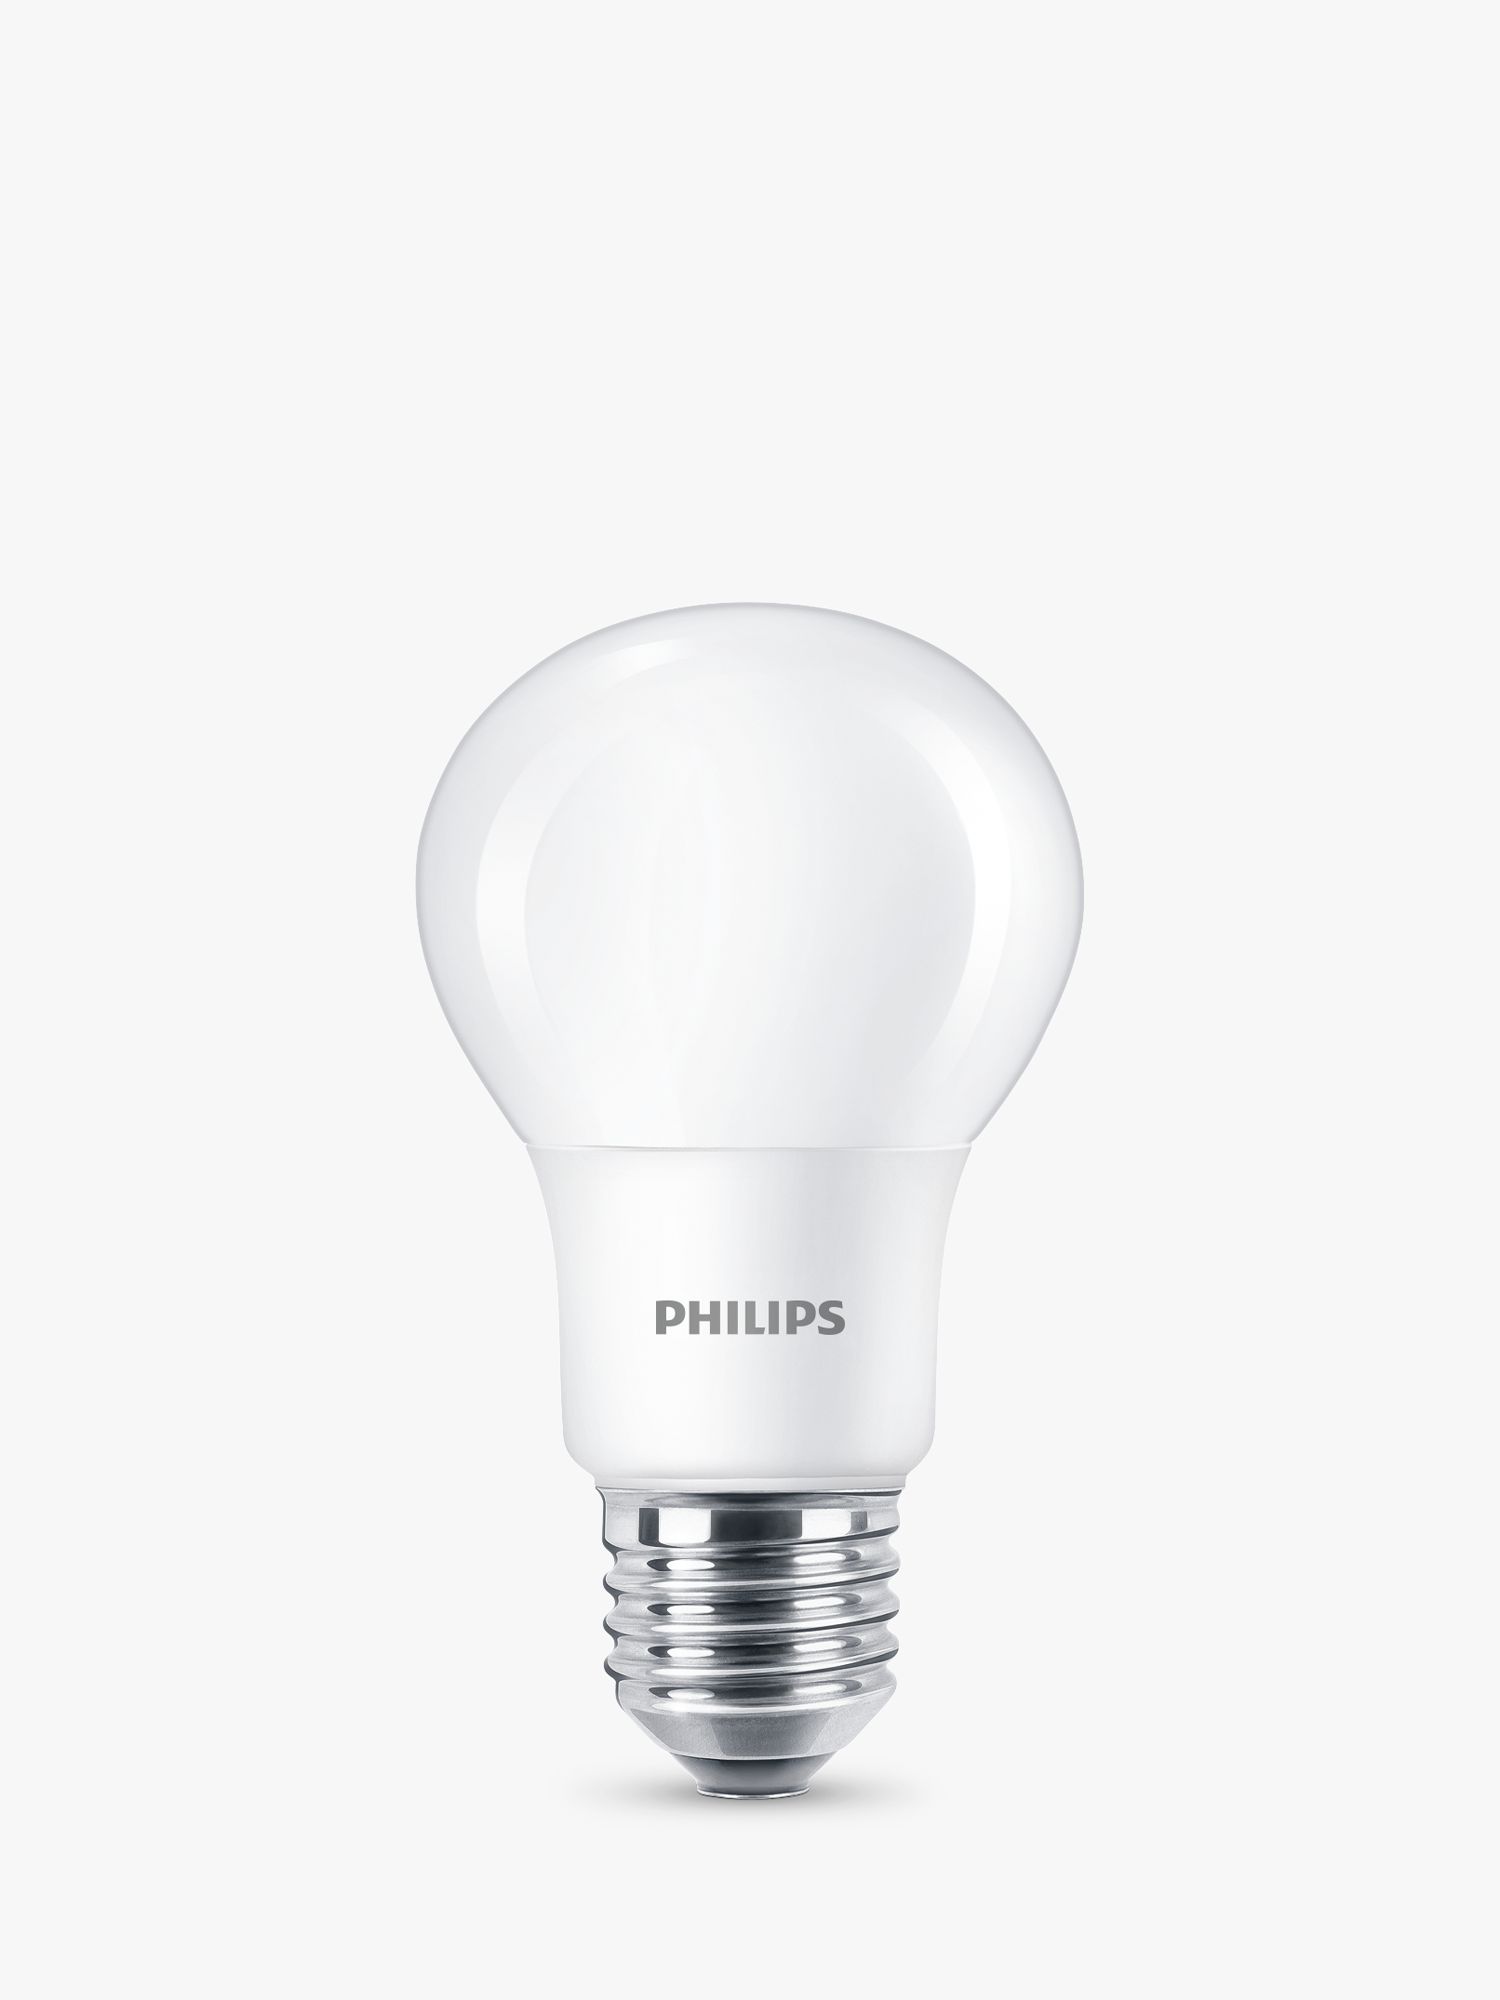 Photo of Philips 8w e27 led non dimmable classic bulbs warm white set of 2